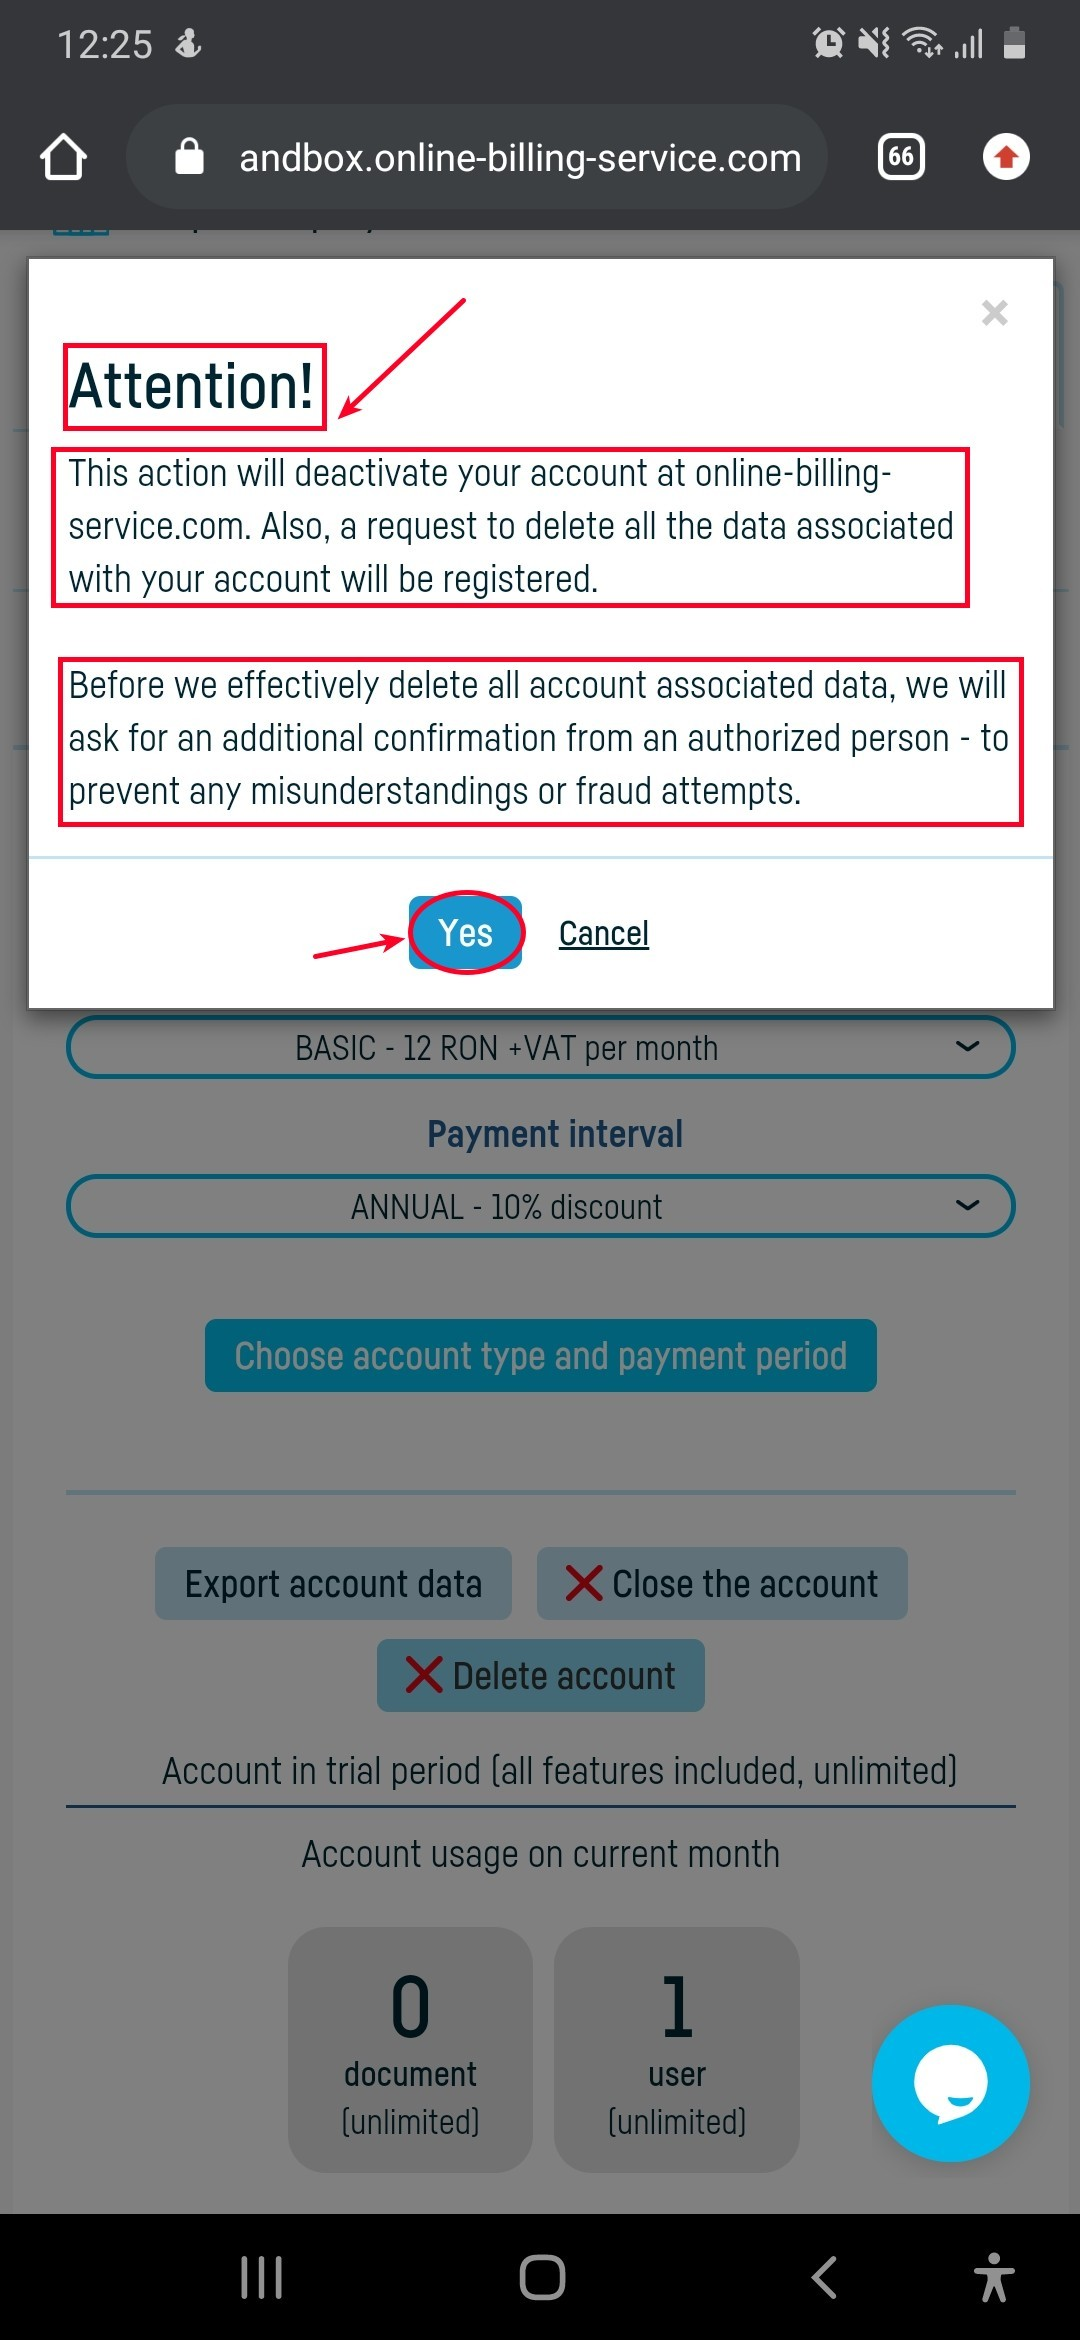 How do I delete my account and associated data? - step 3